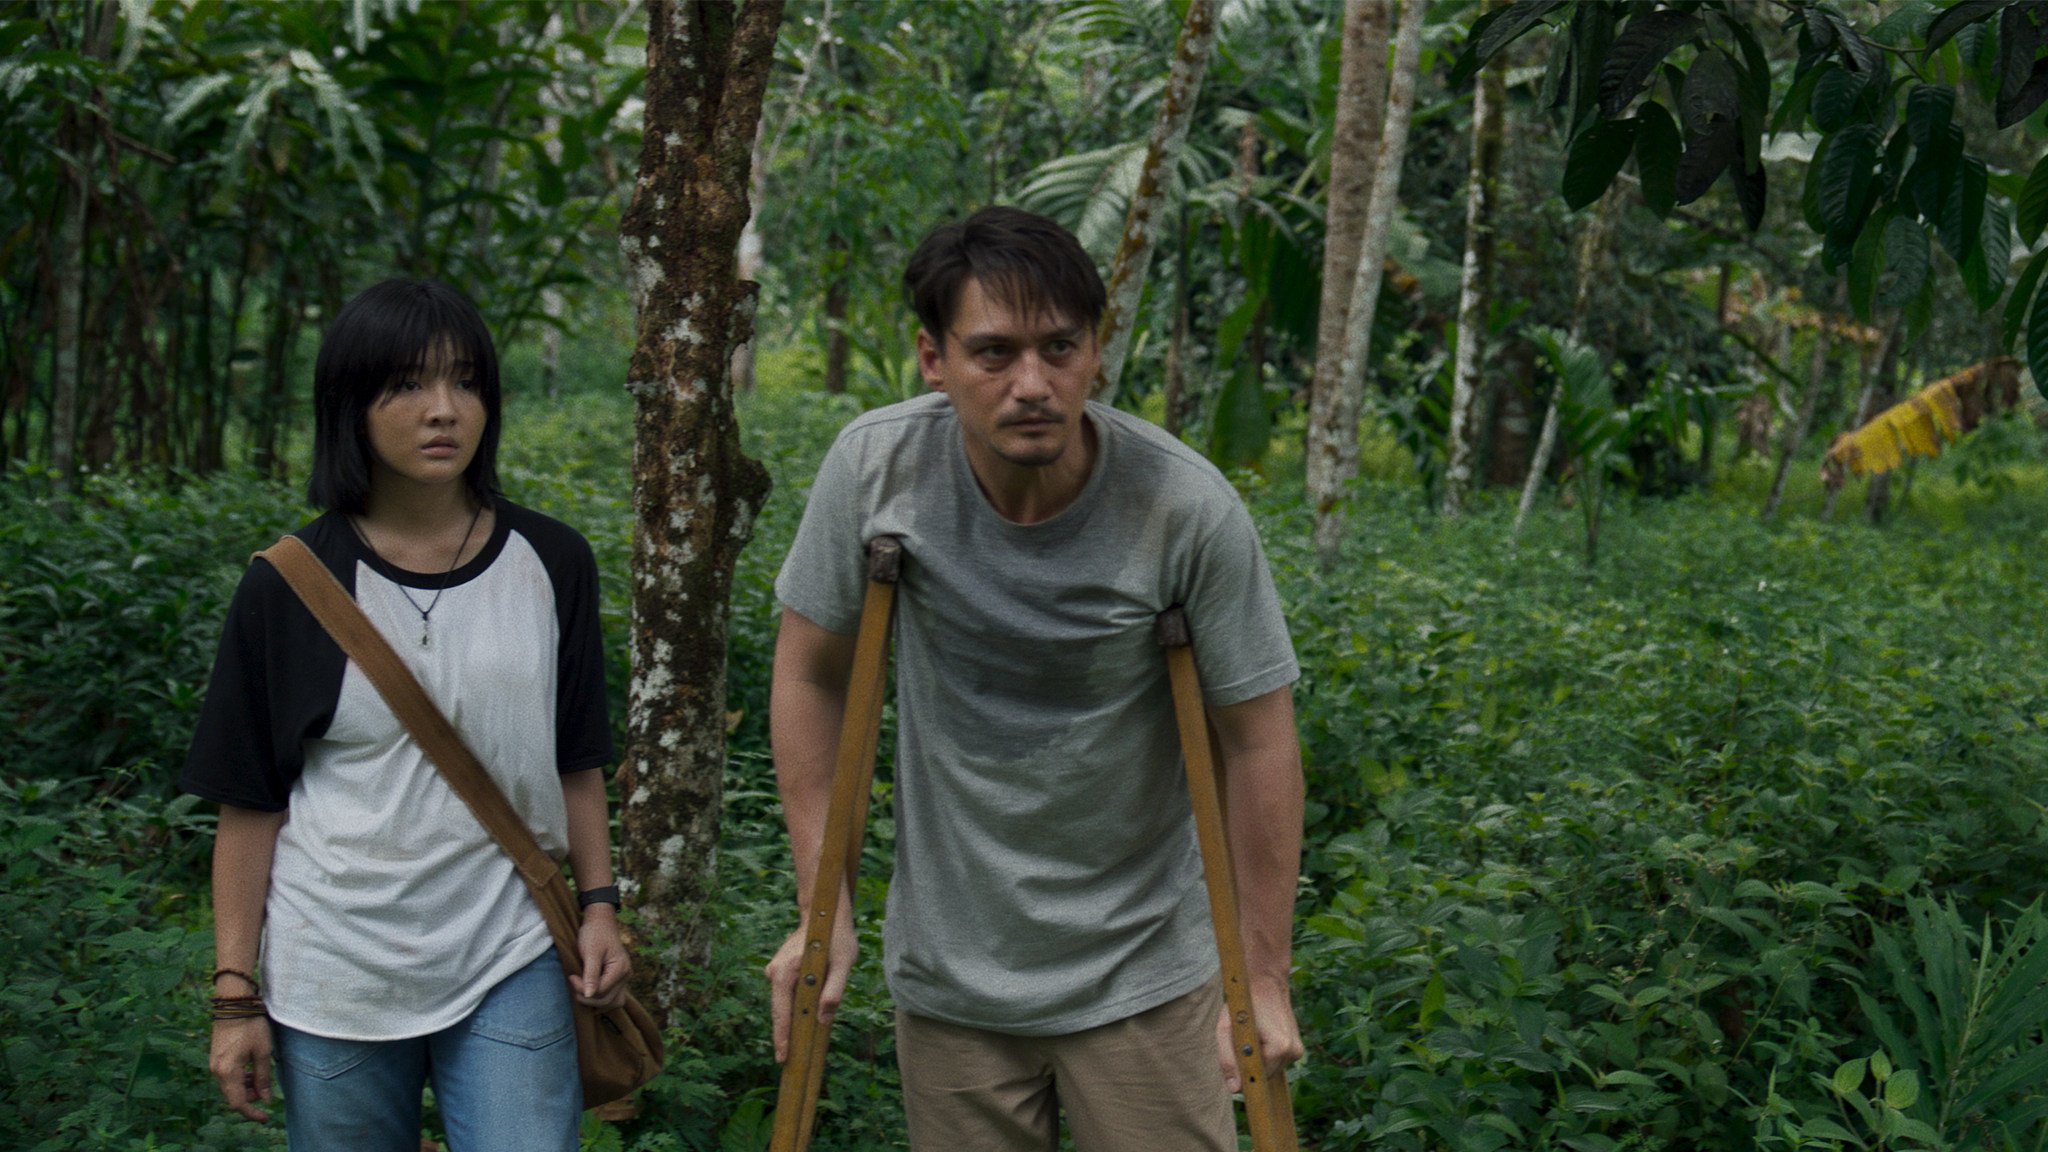 Jennis Oprasert (left) as May and Ananda Everingham as Mit in a still from “The Cursed Land”. Photo: courtesy of Panu Aree/Neramitnung Film.